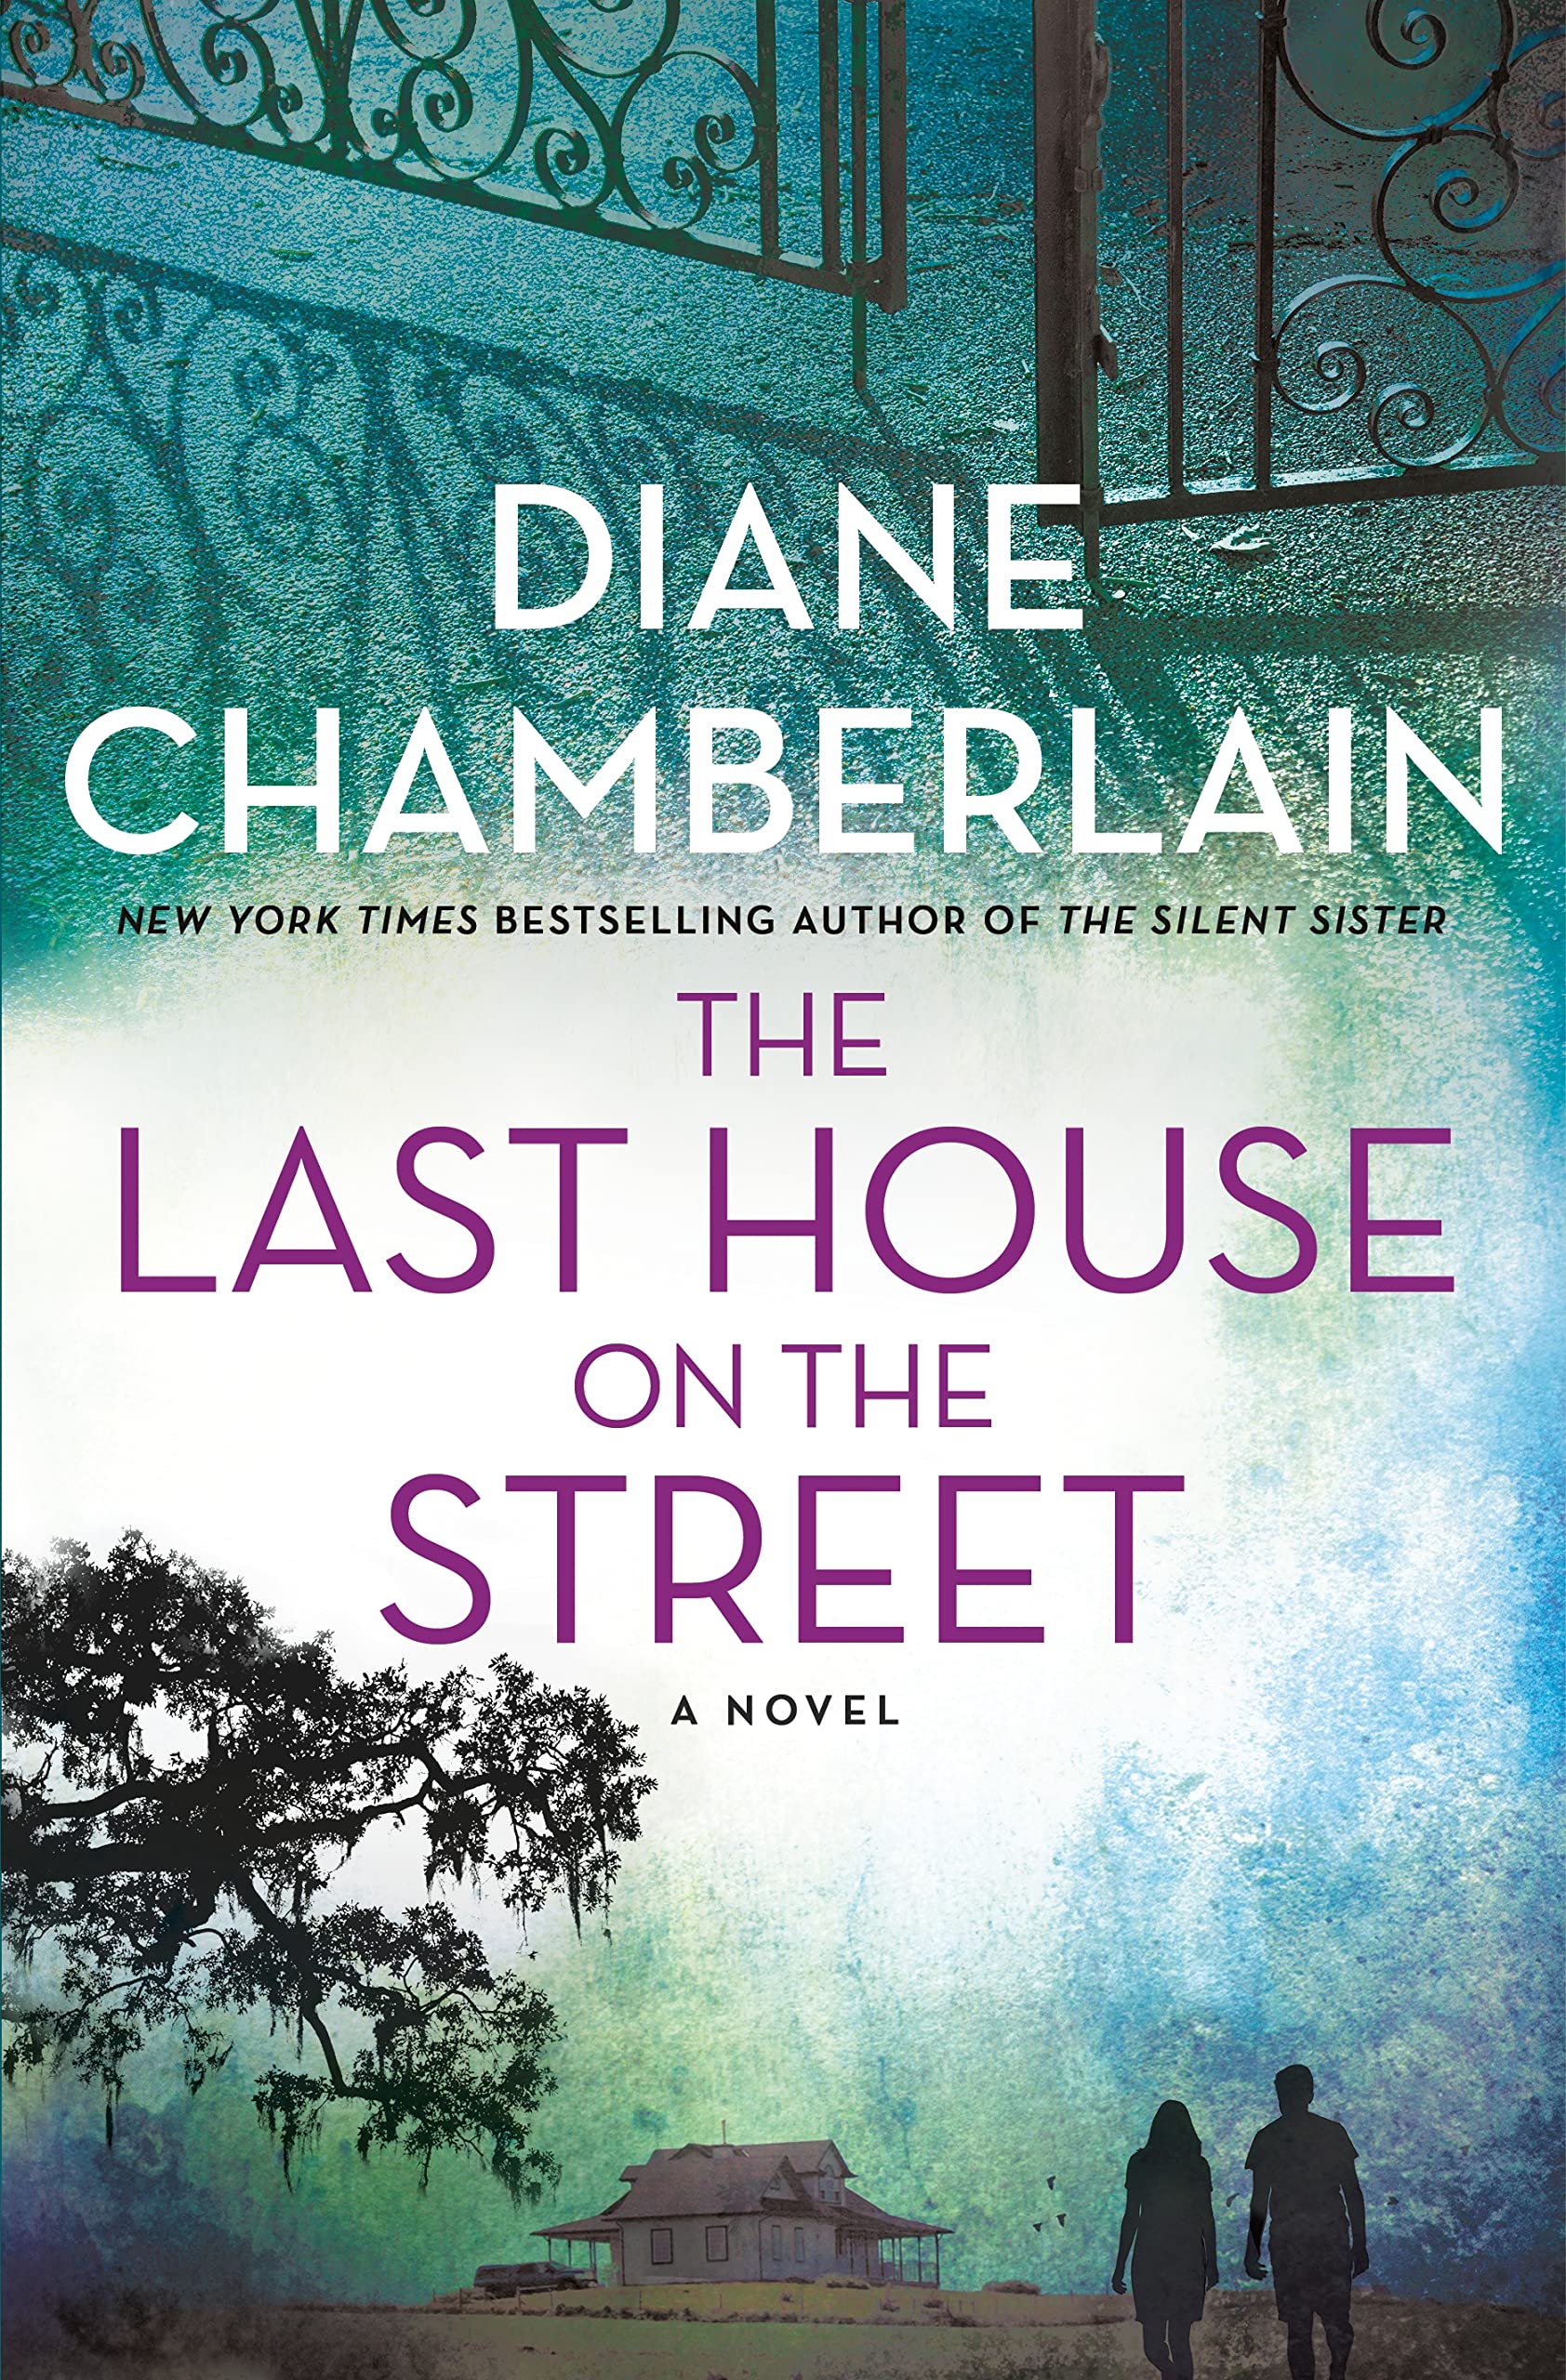 Image for "The Last House on the Street"